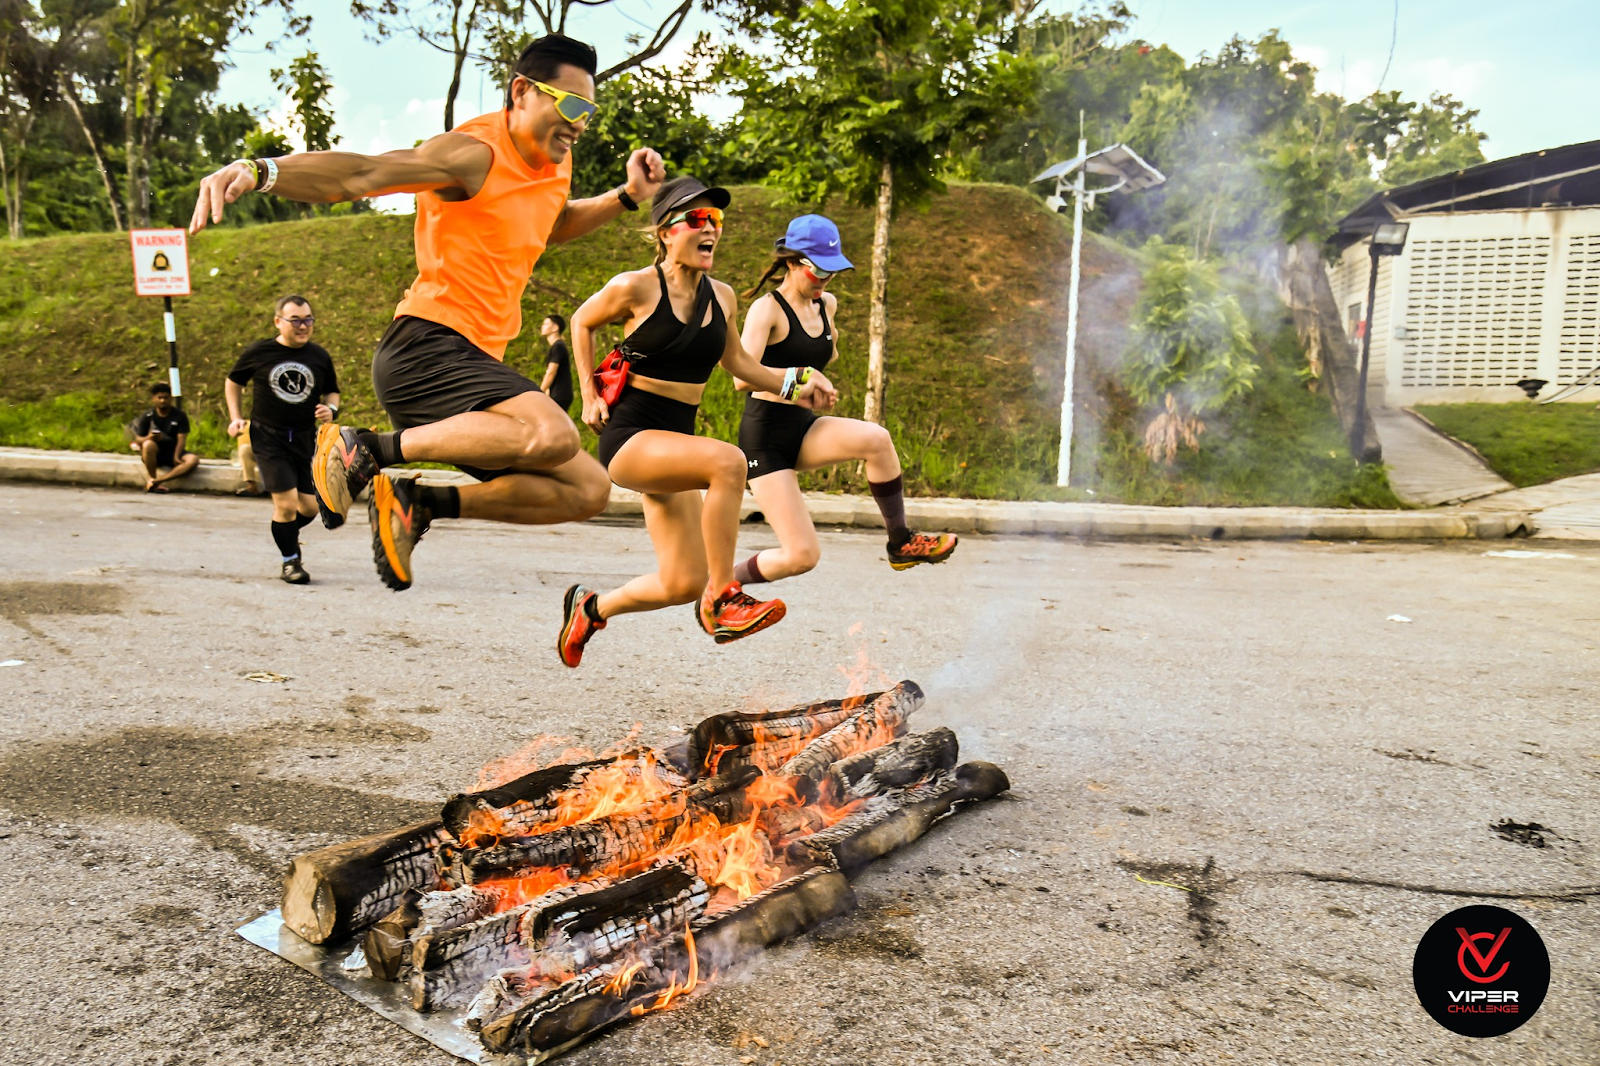 Participants Jumping Over Fire in Obstacle Course